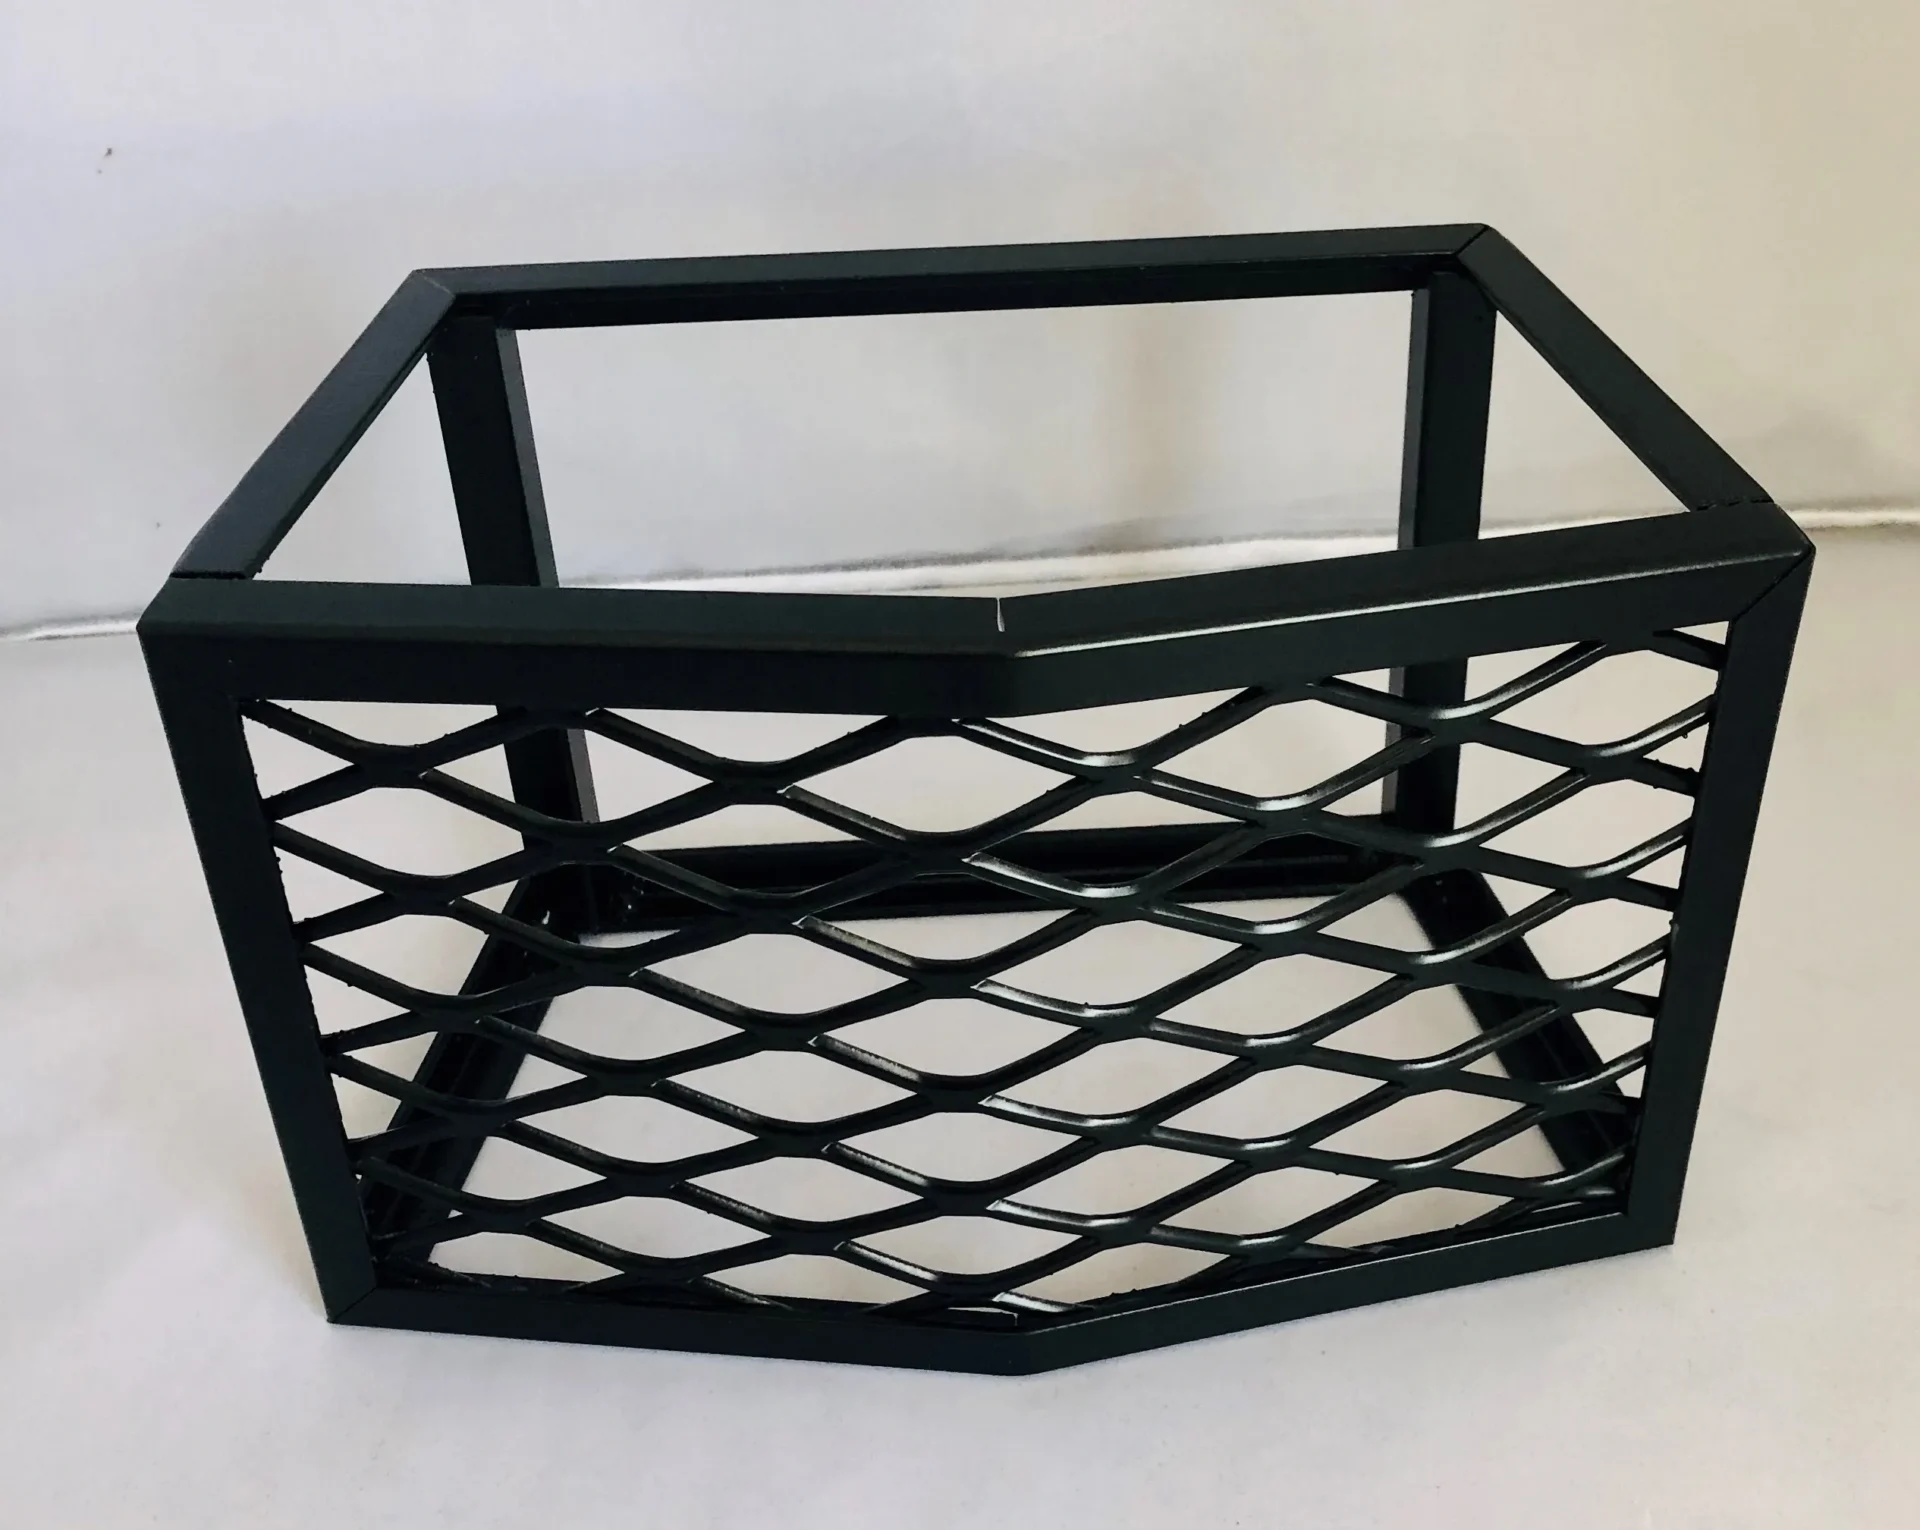 A black basket with a white background